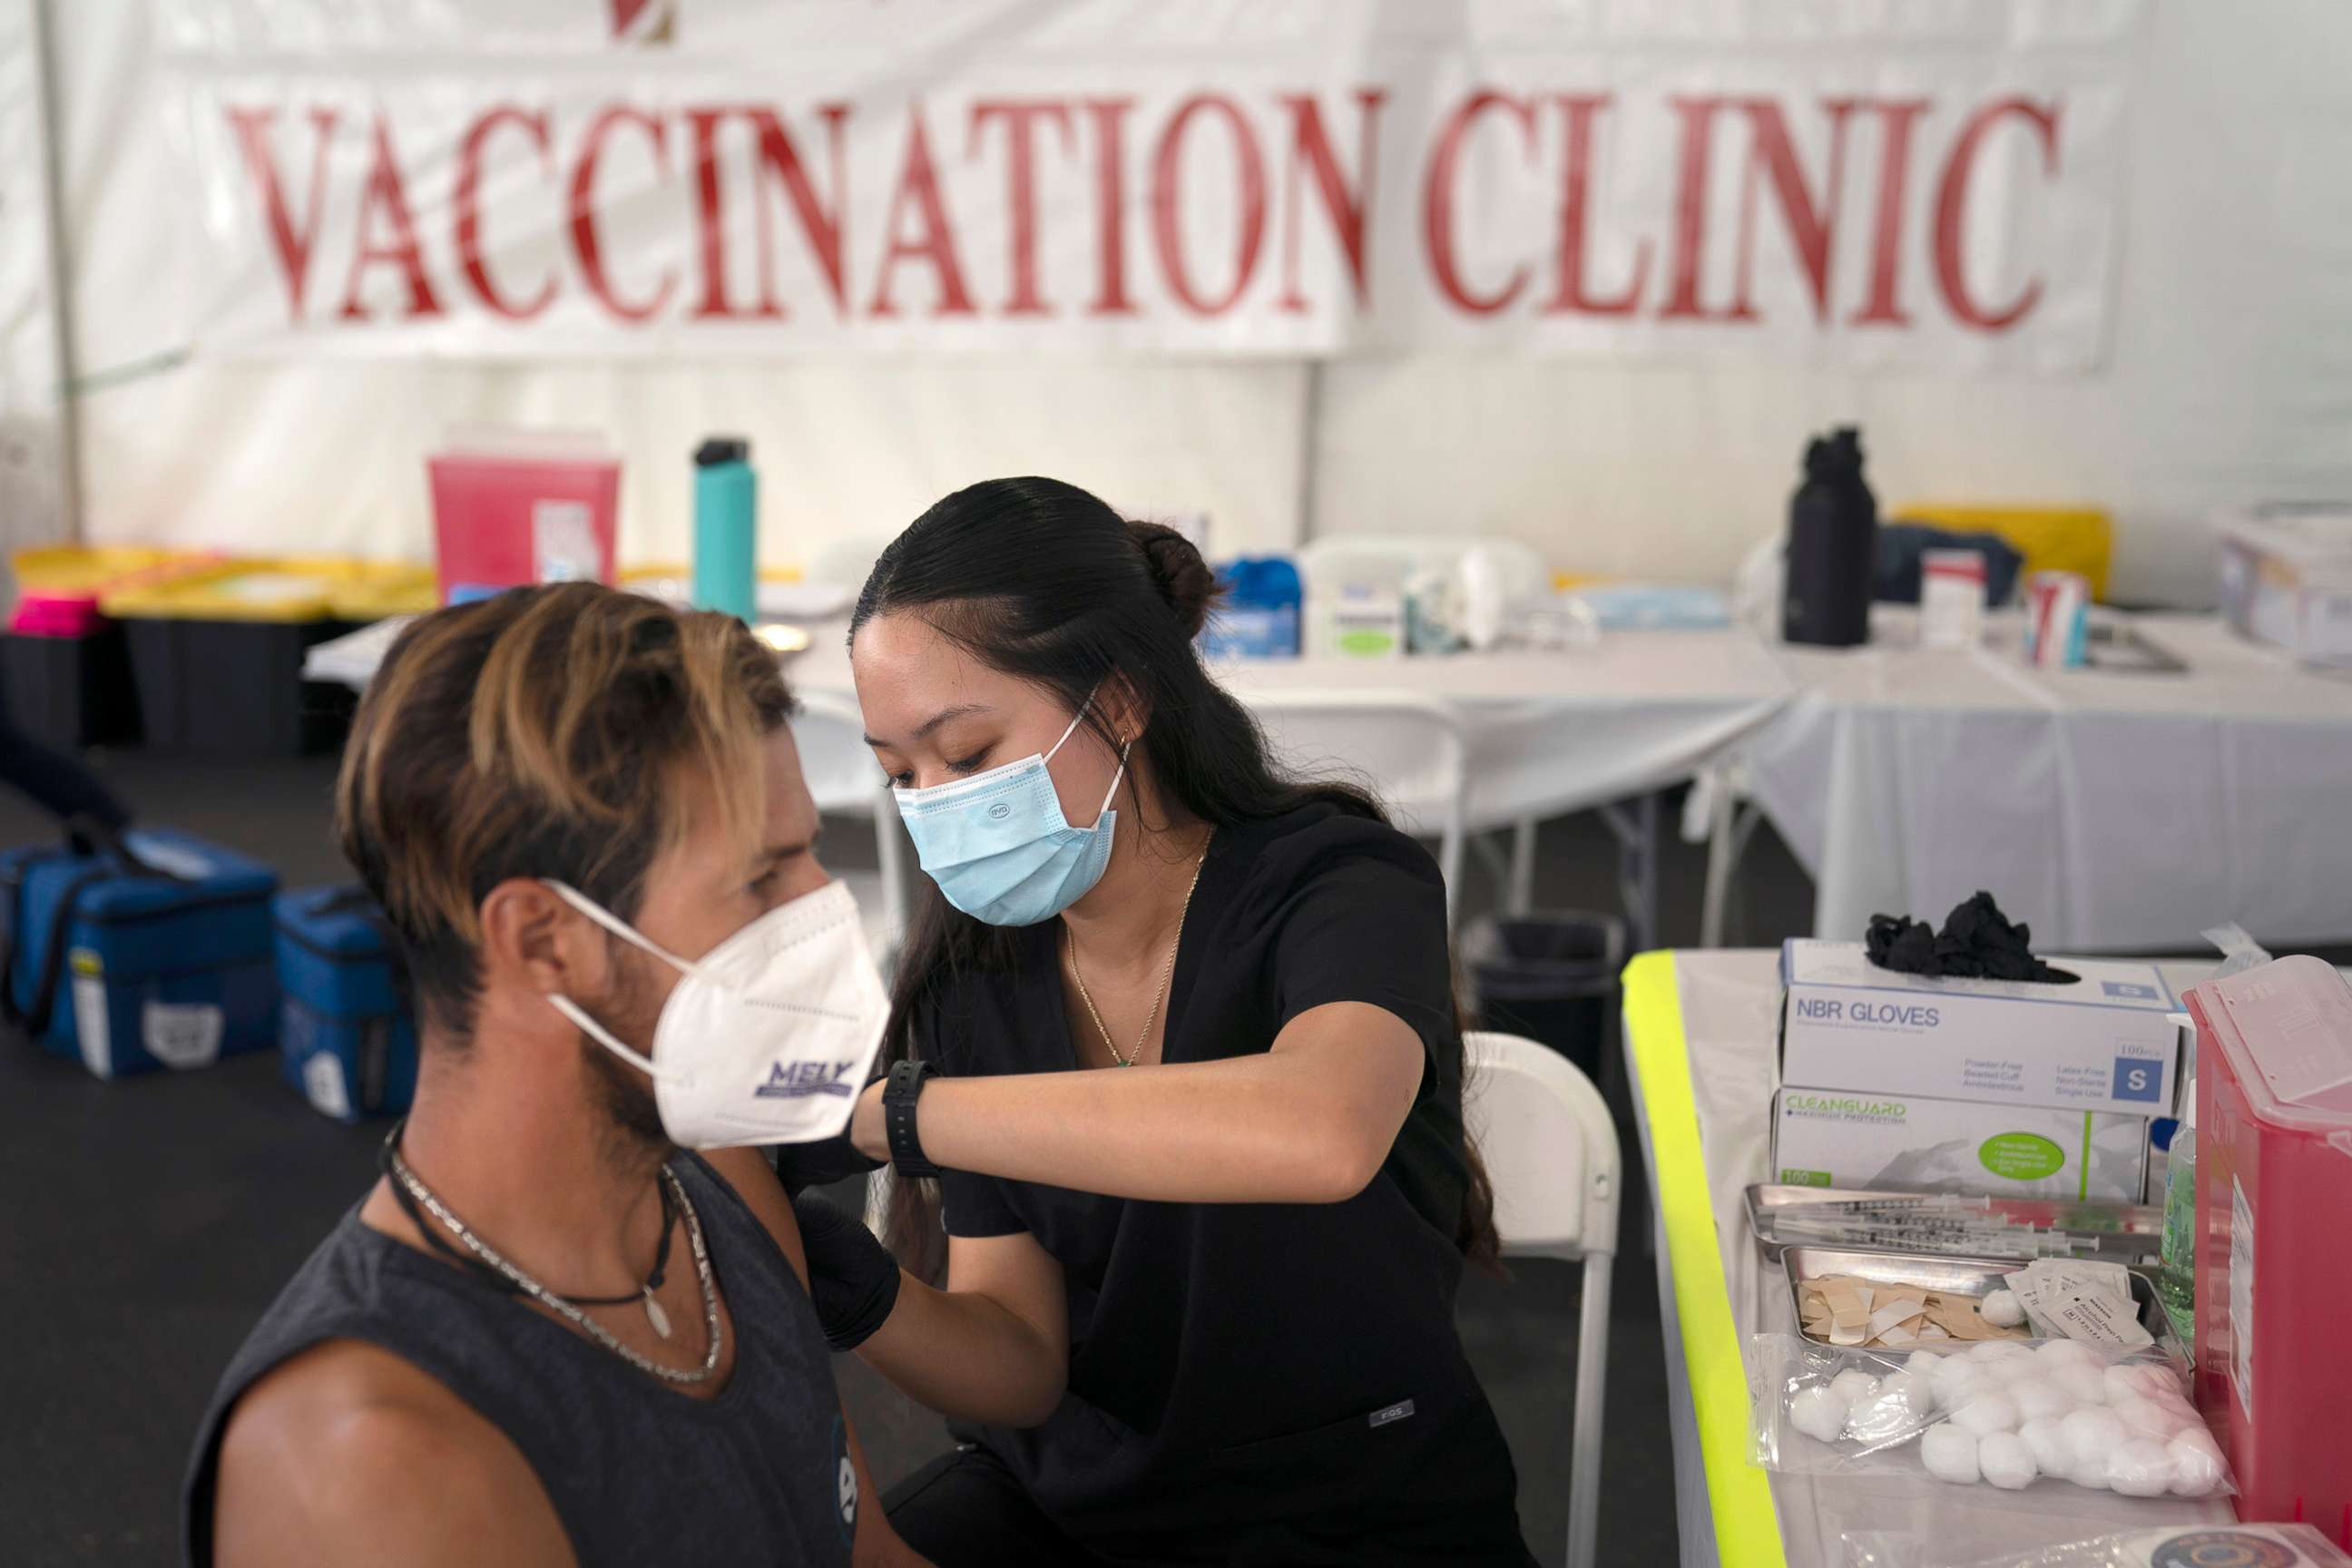 PHOTO: Registered nurse, Noleen Nobleza inoculates Julio Quinones with the COVID-19 vaccine at a clinic set up in a parking lot, Aug. 28, 2021, in Orange, Calif.